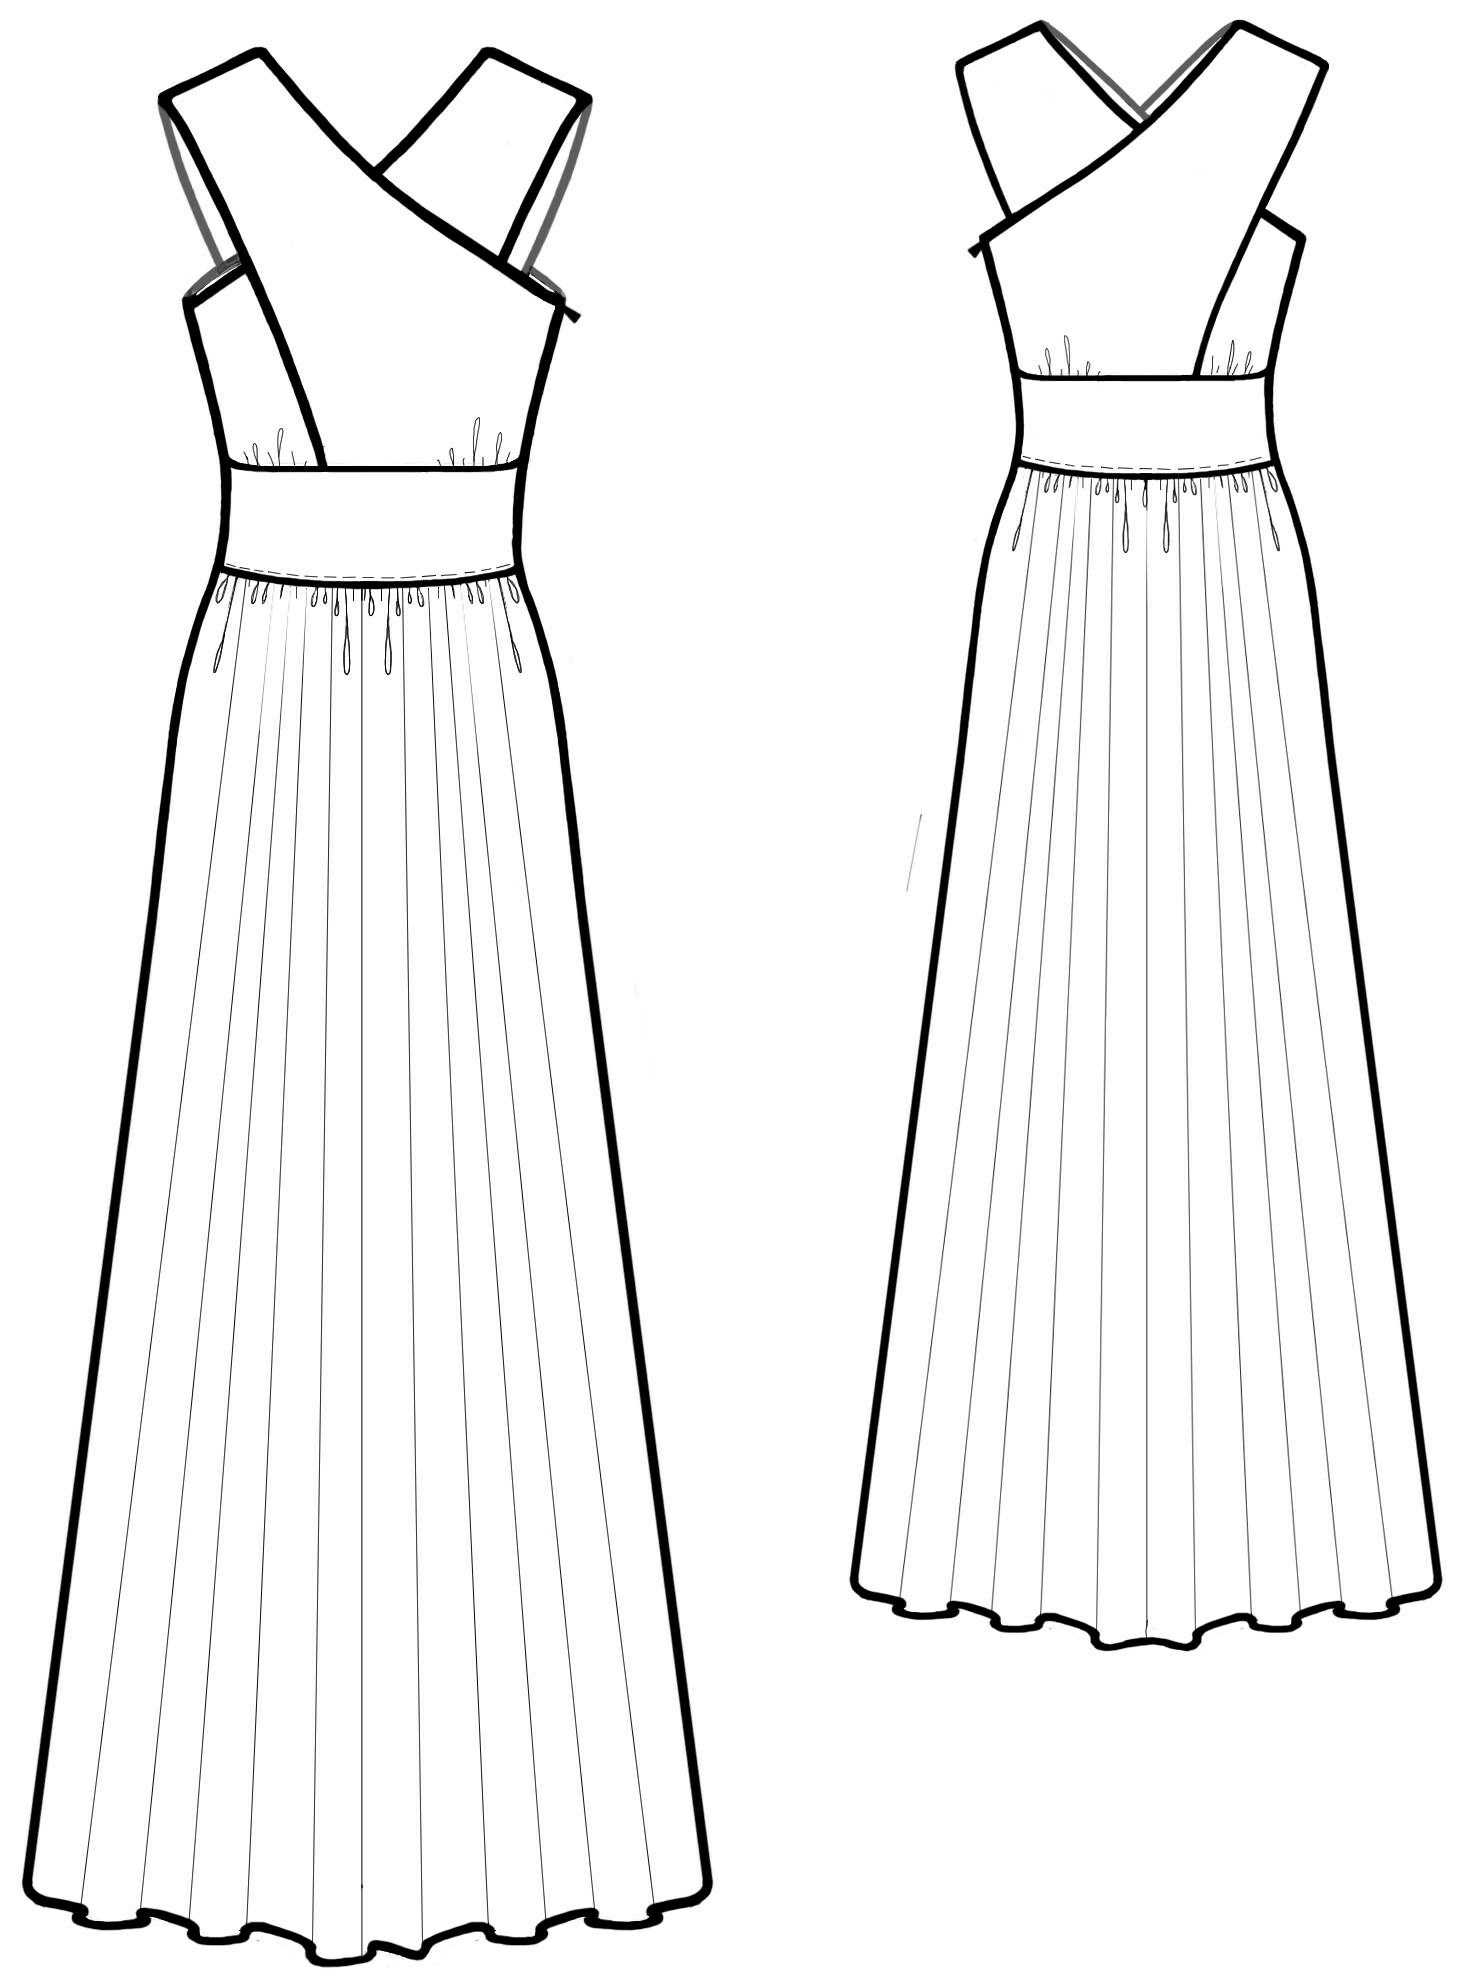 Dress - Sewing Pattern #5584. Made-to-measure sewing pattern from